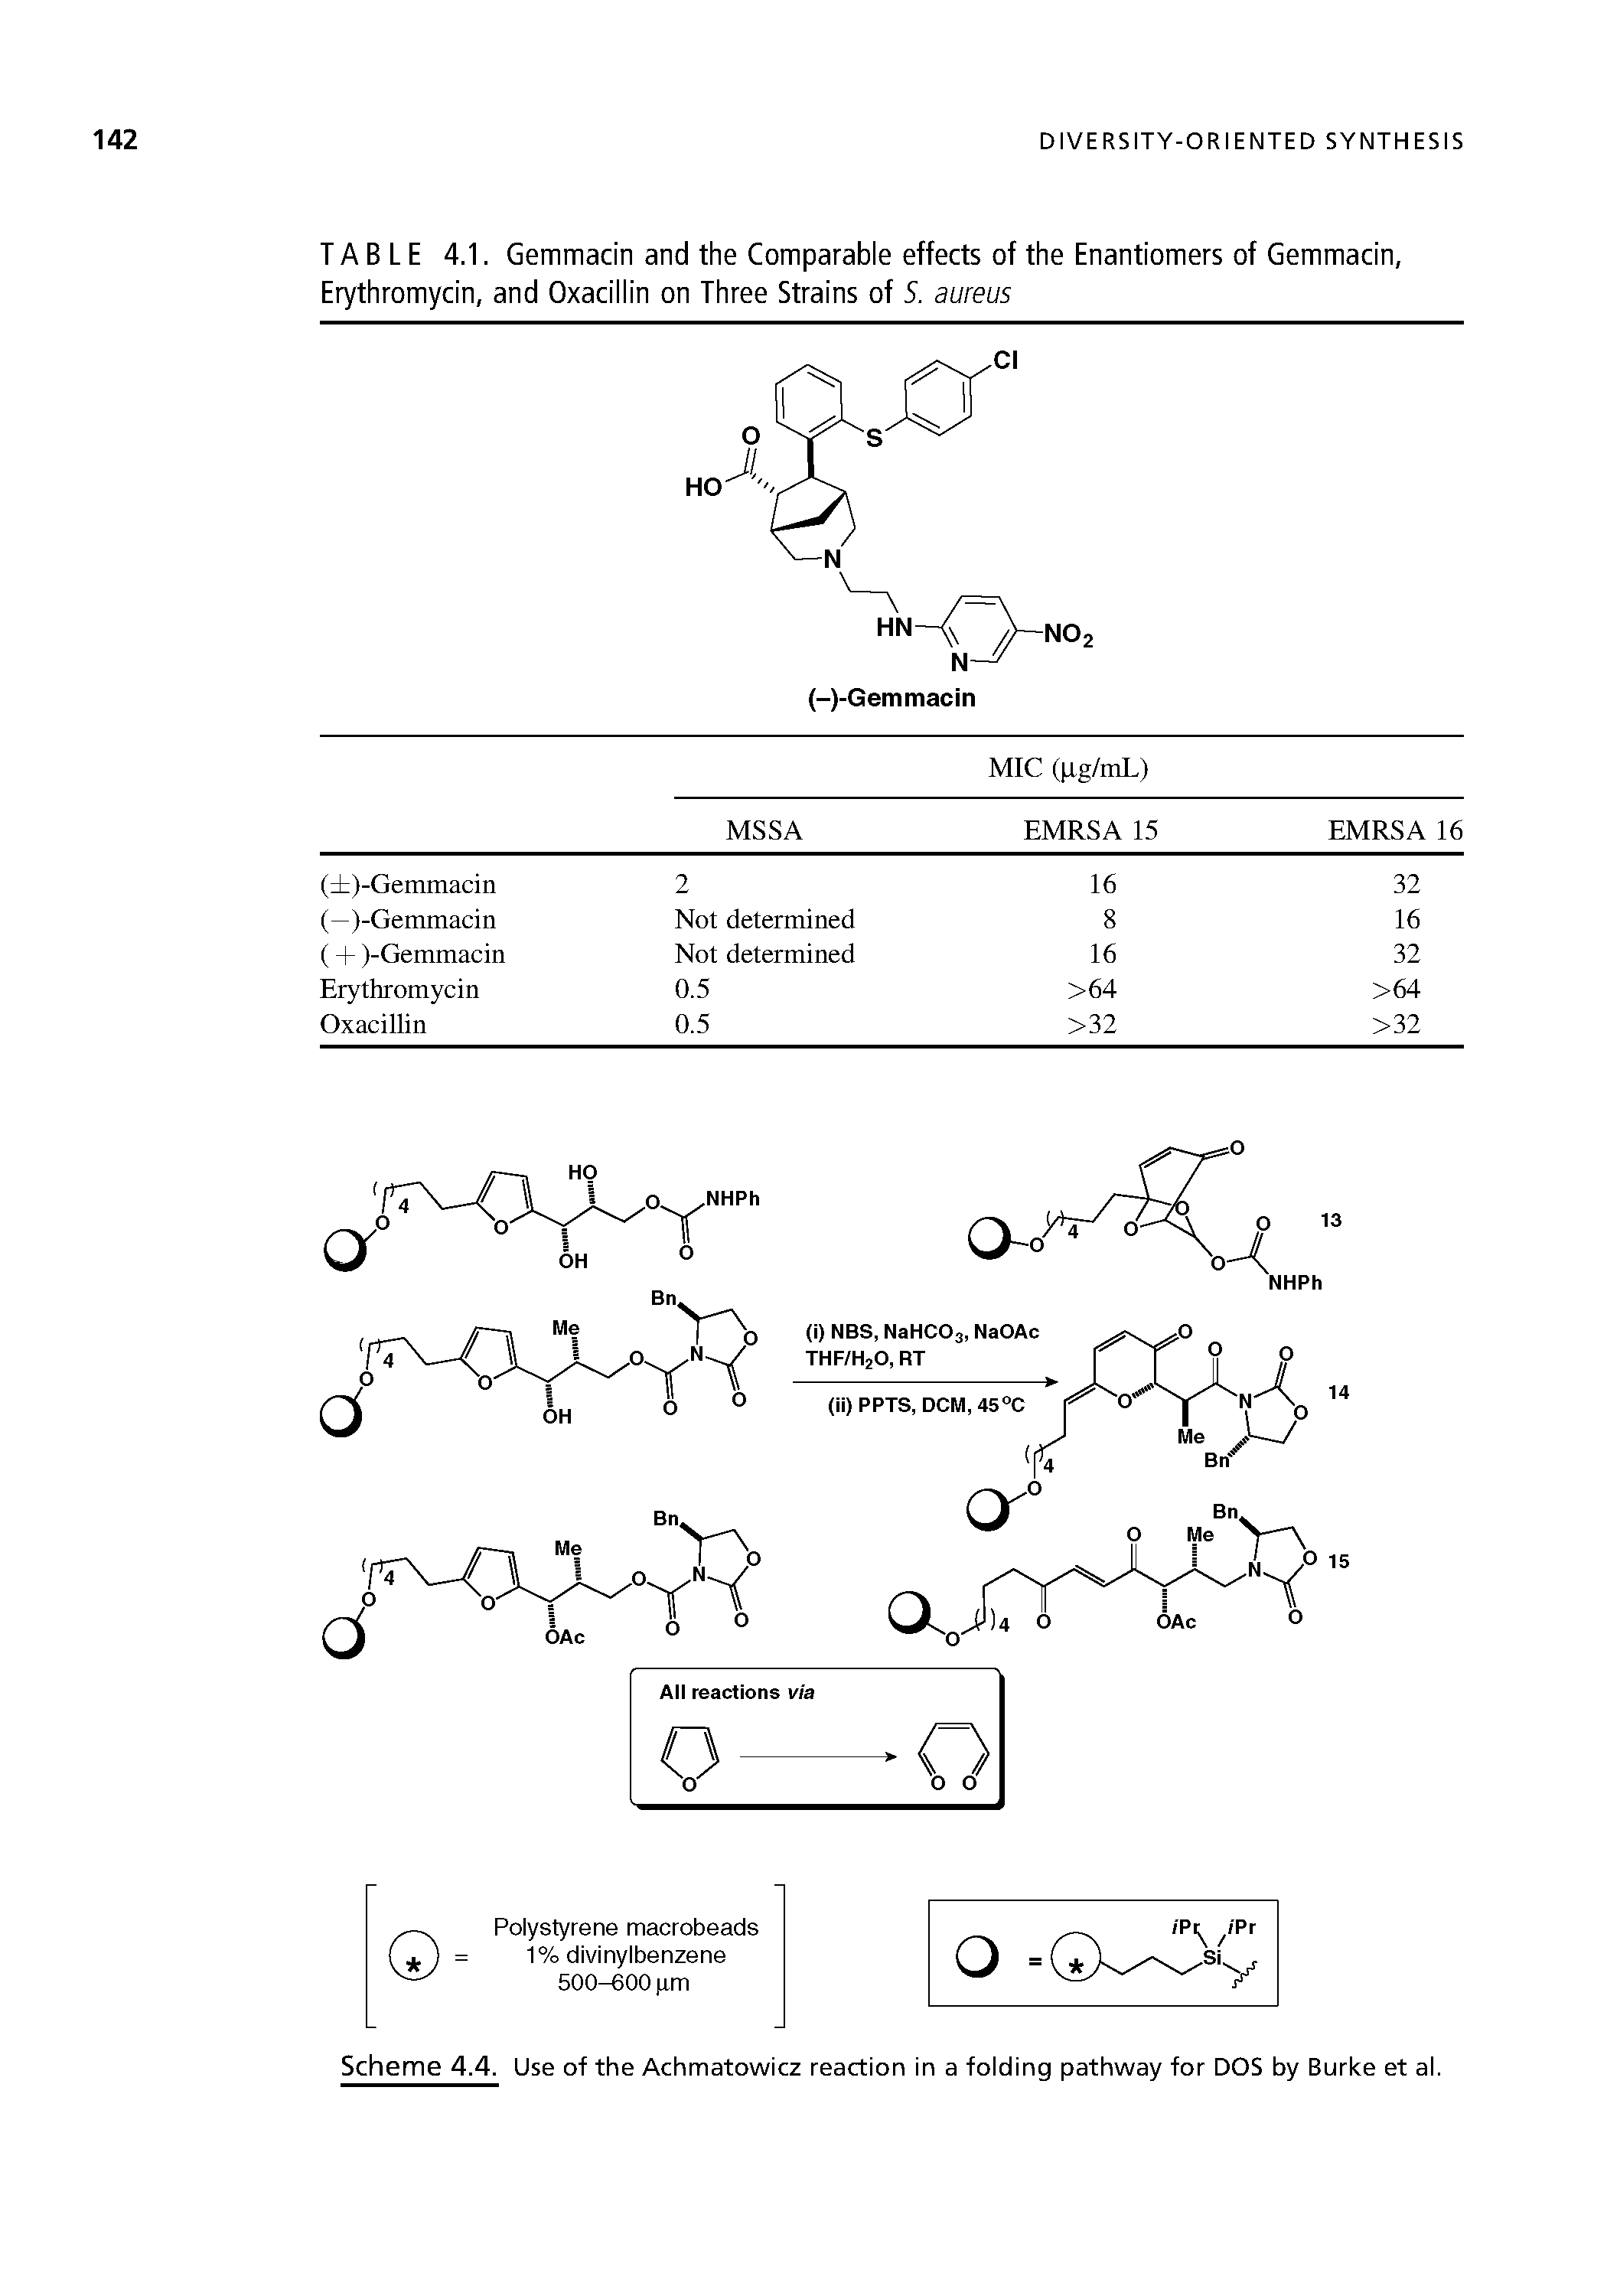 Scheme 4.4. Use of the Achmatowicz reaction in a folding pathway for DOS by Burke et al.